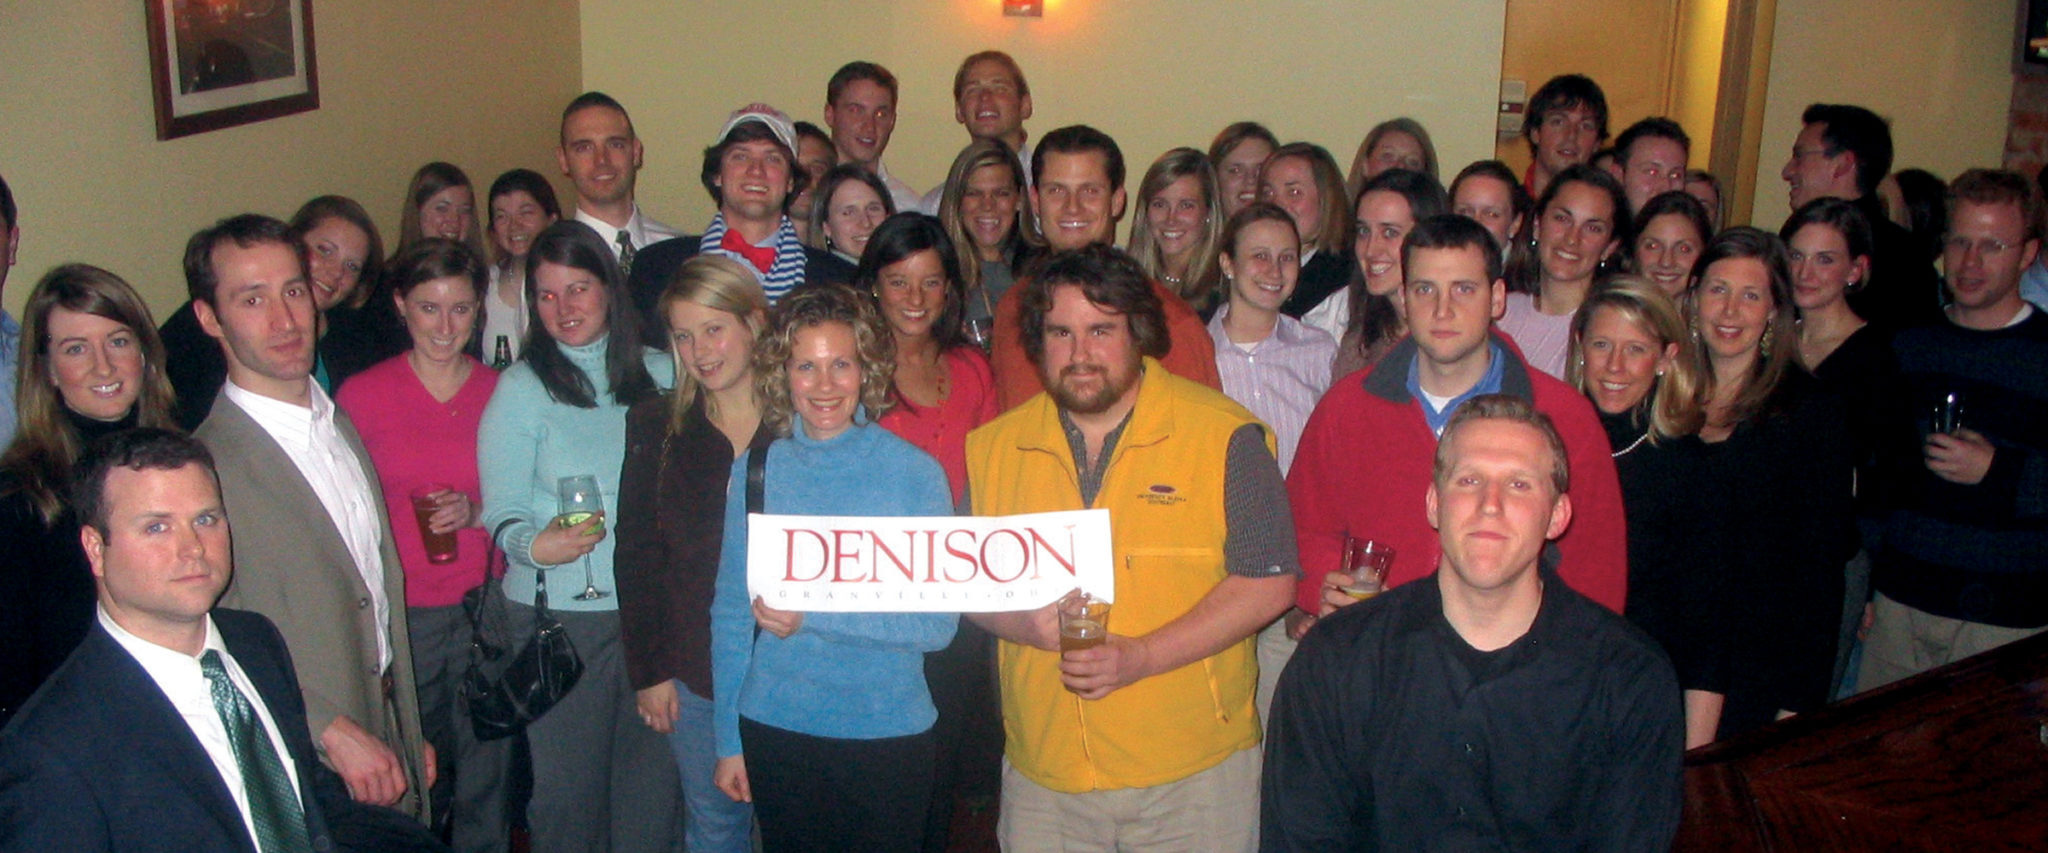 Alumni Society - After Work with Denison - Spring 2006